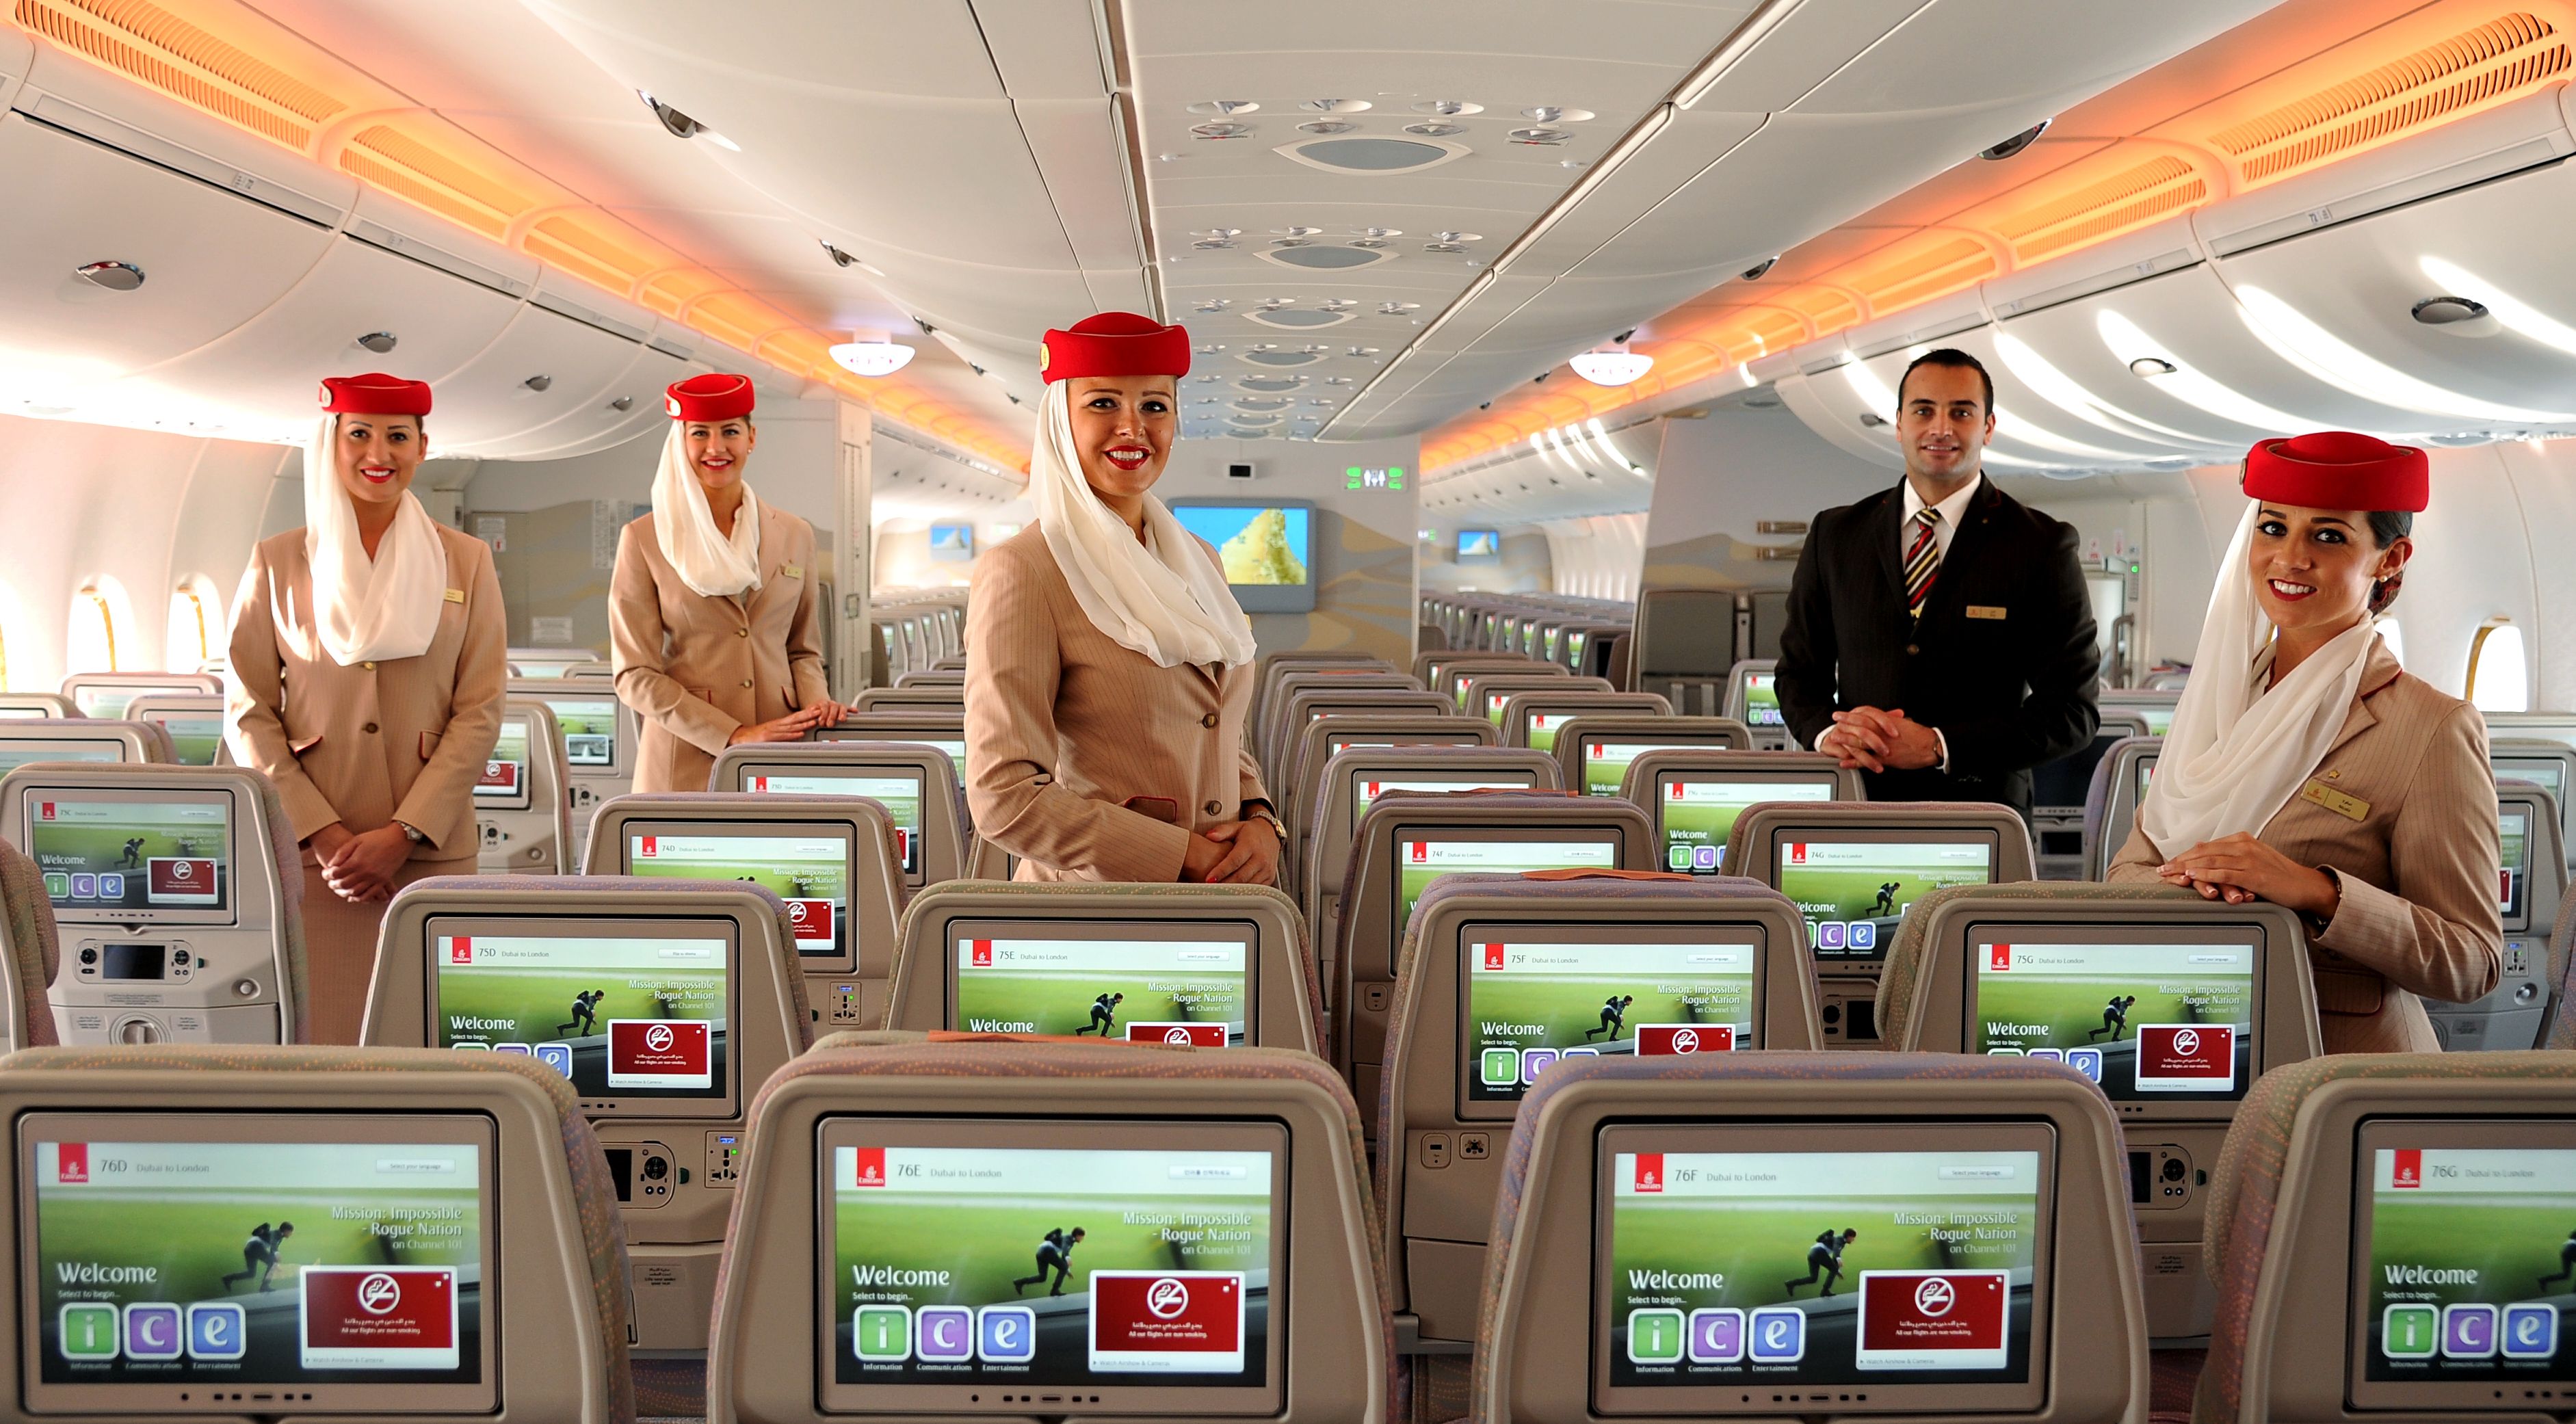 skr-9628-986062 - Emirates co-ed Cabin Crew in an Airbus A380 cabin